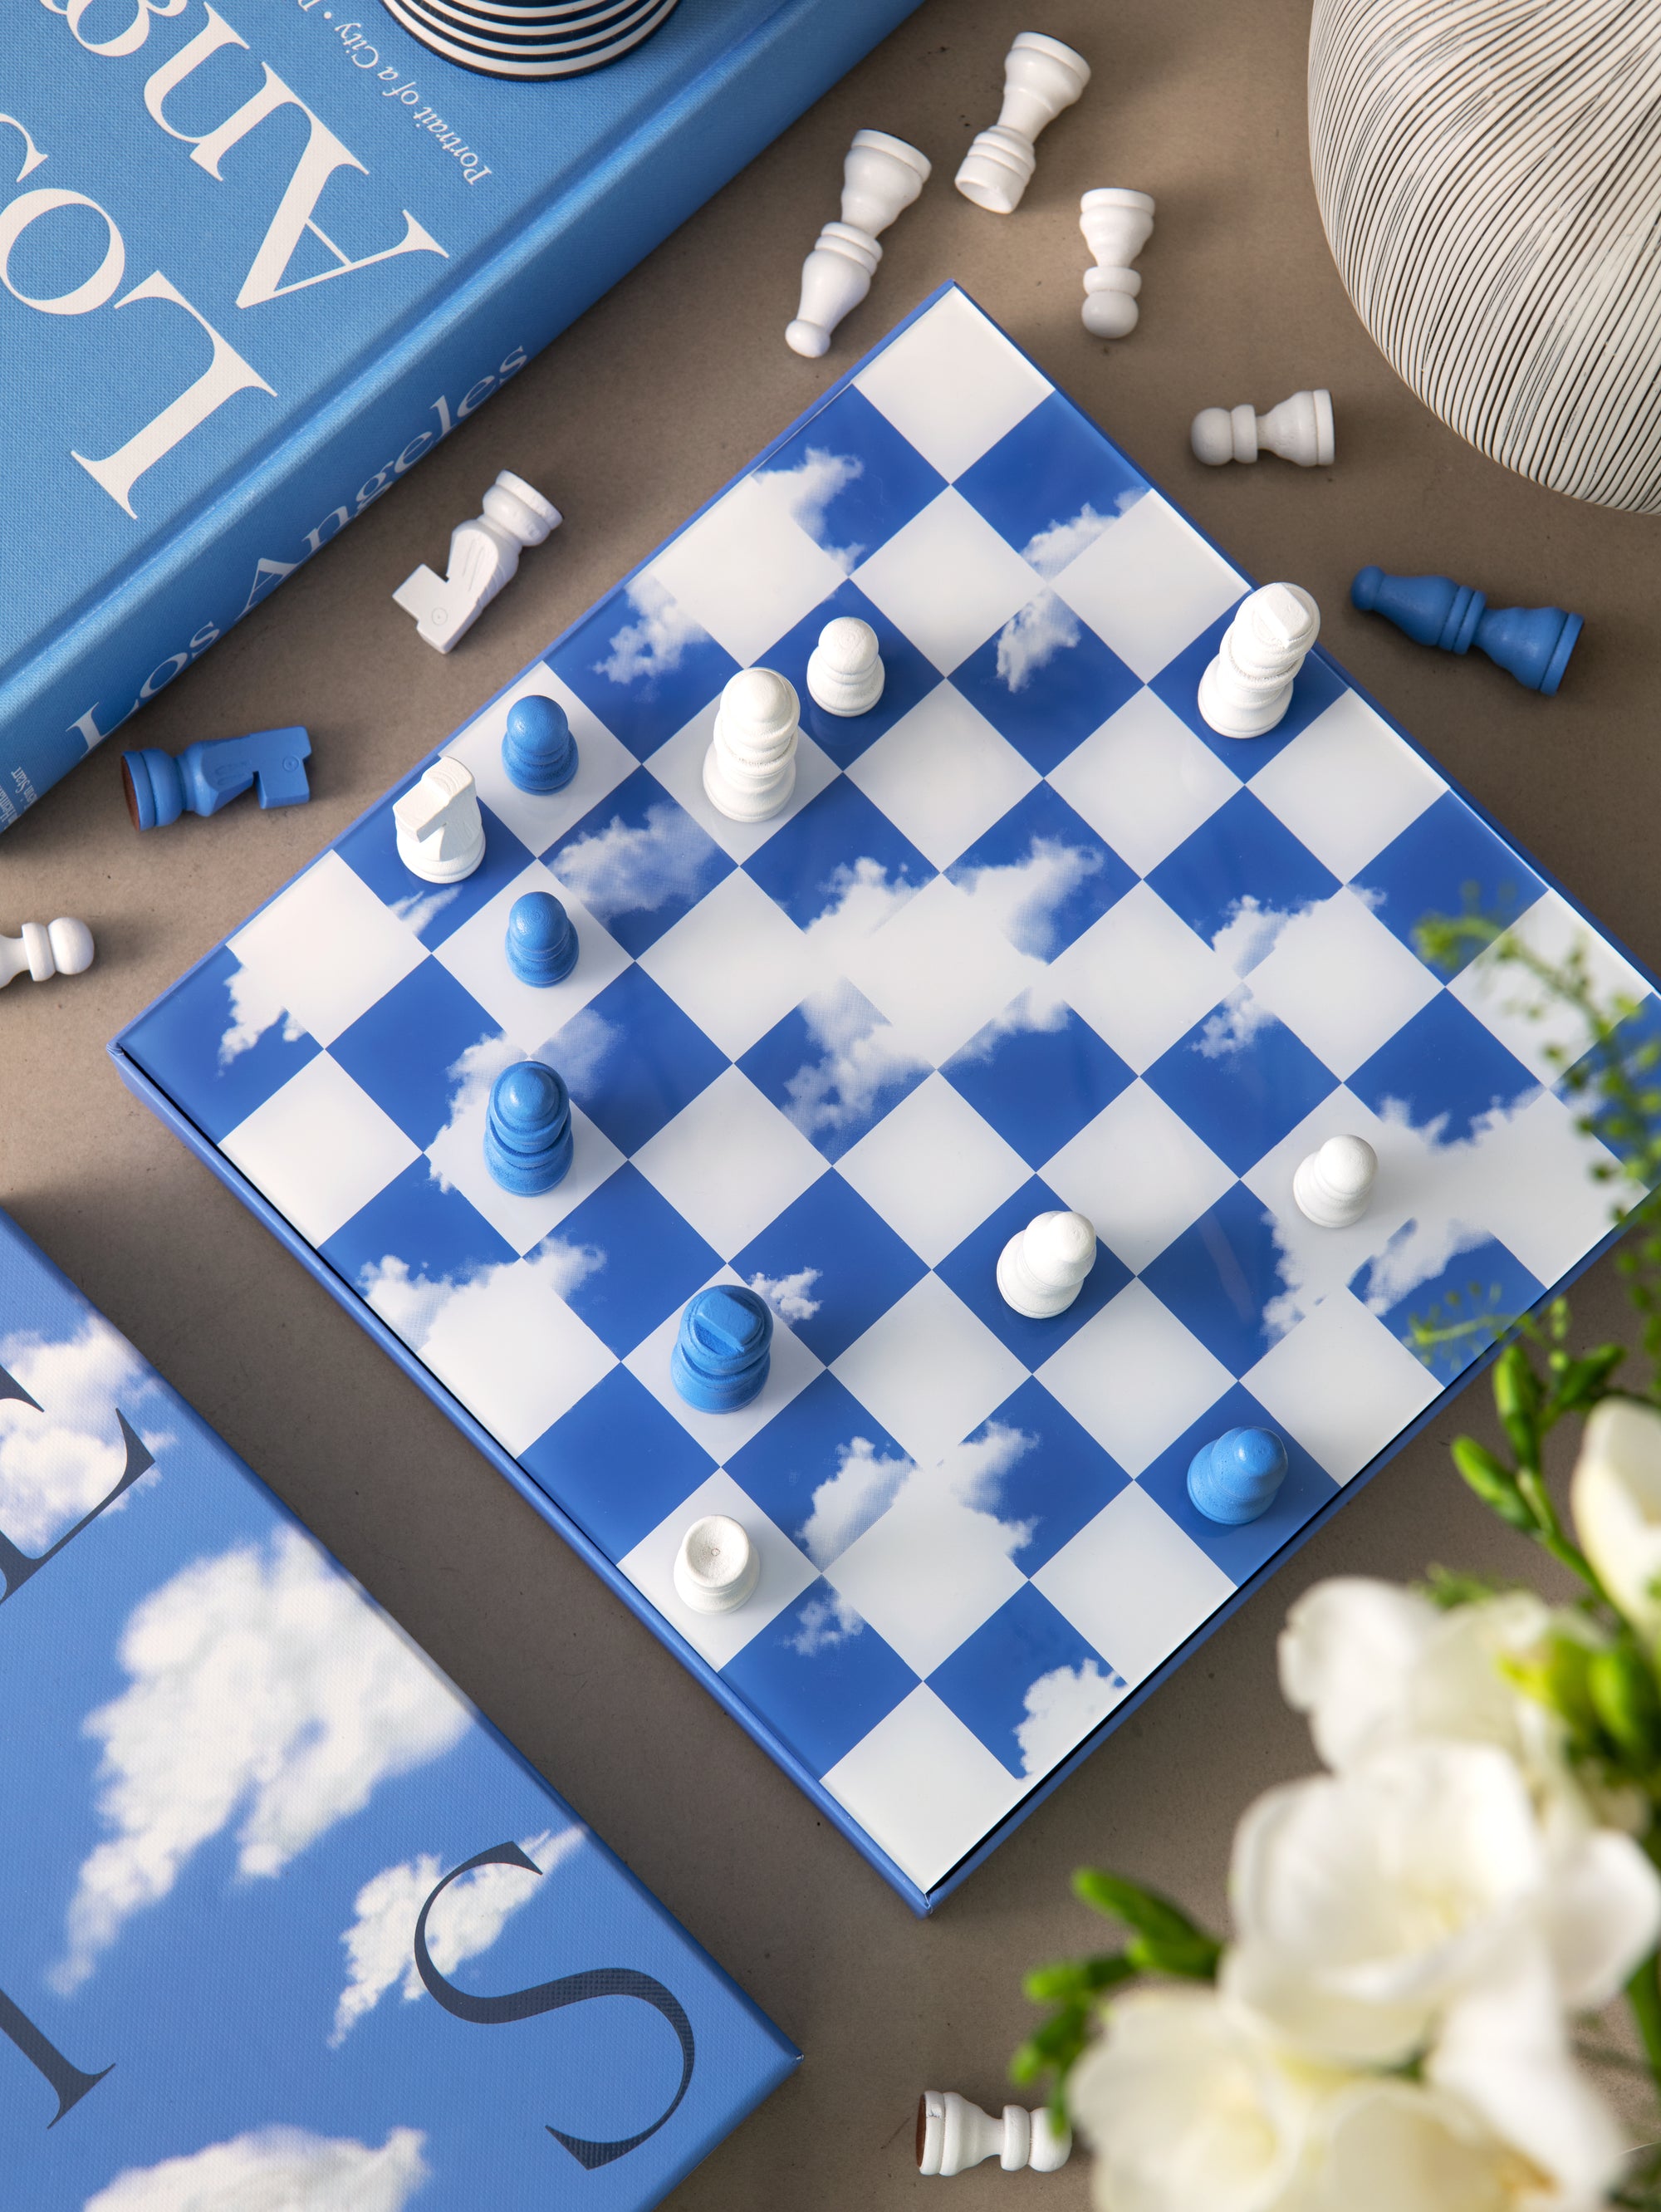 Art of Chess in Cloud